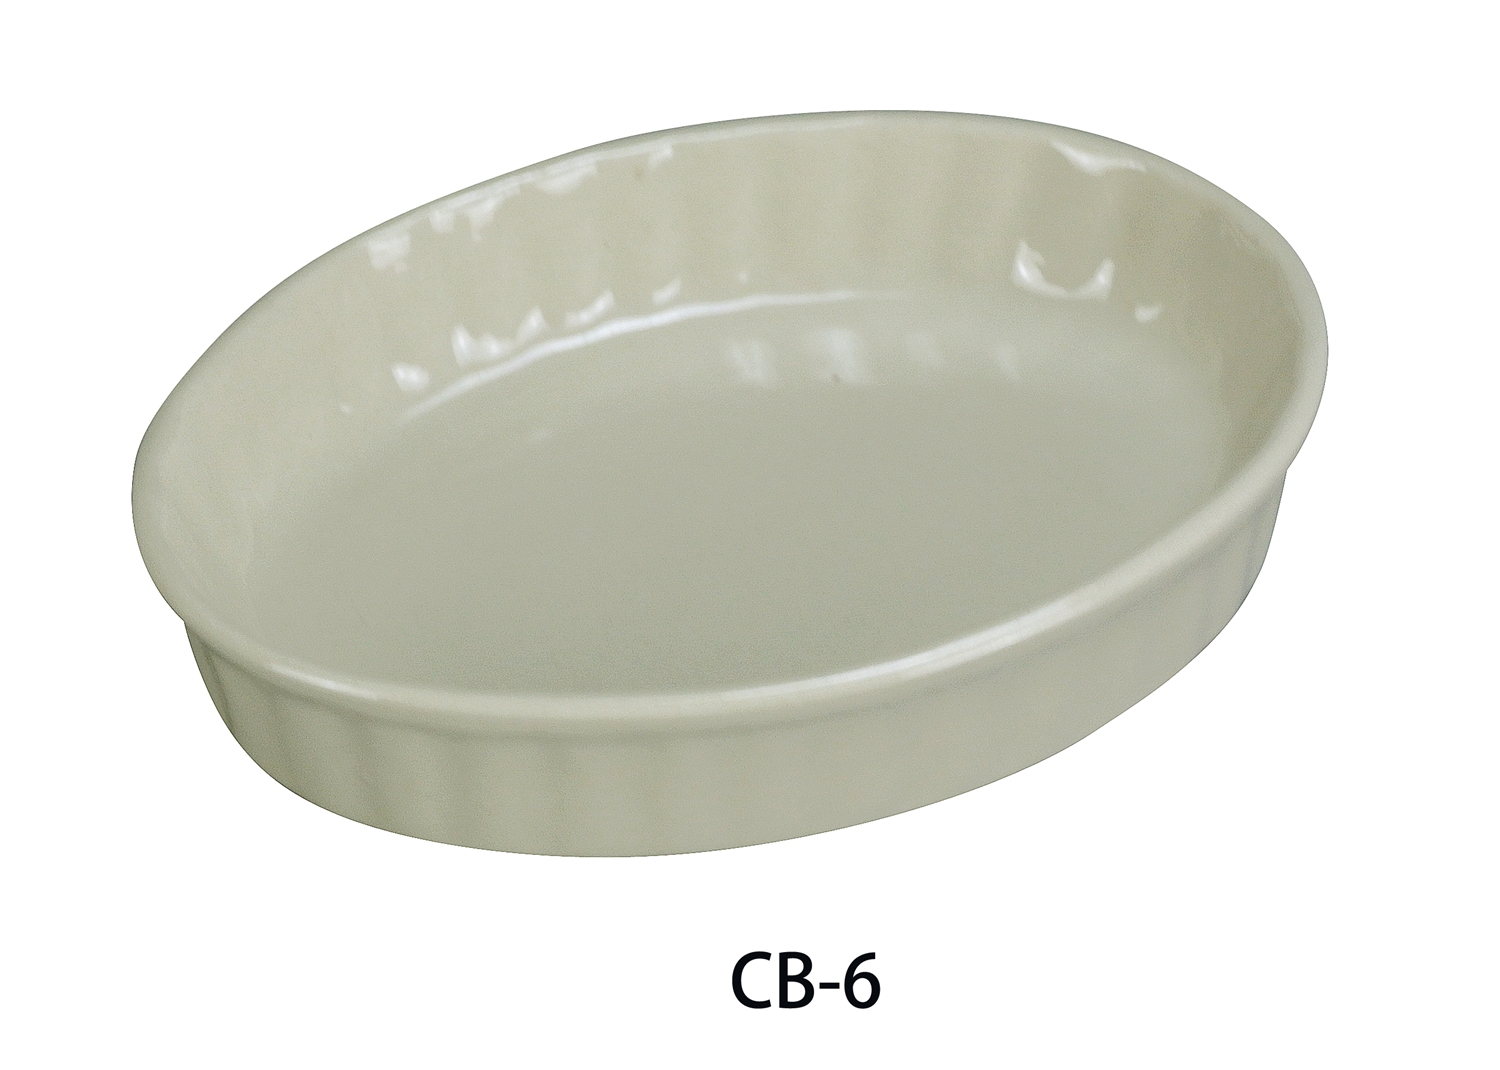 Yanco CB-6 Recovery Creme Brulee American White - by Celebrate Festival Inc